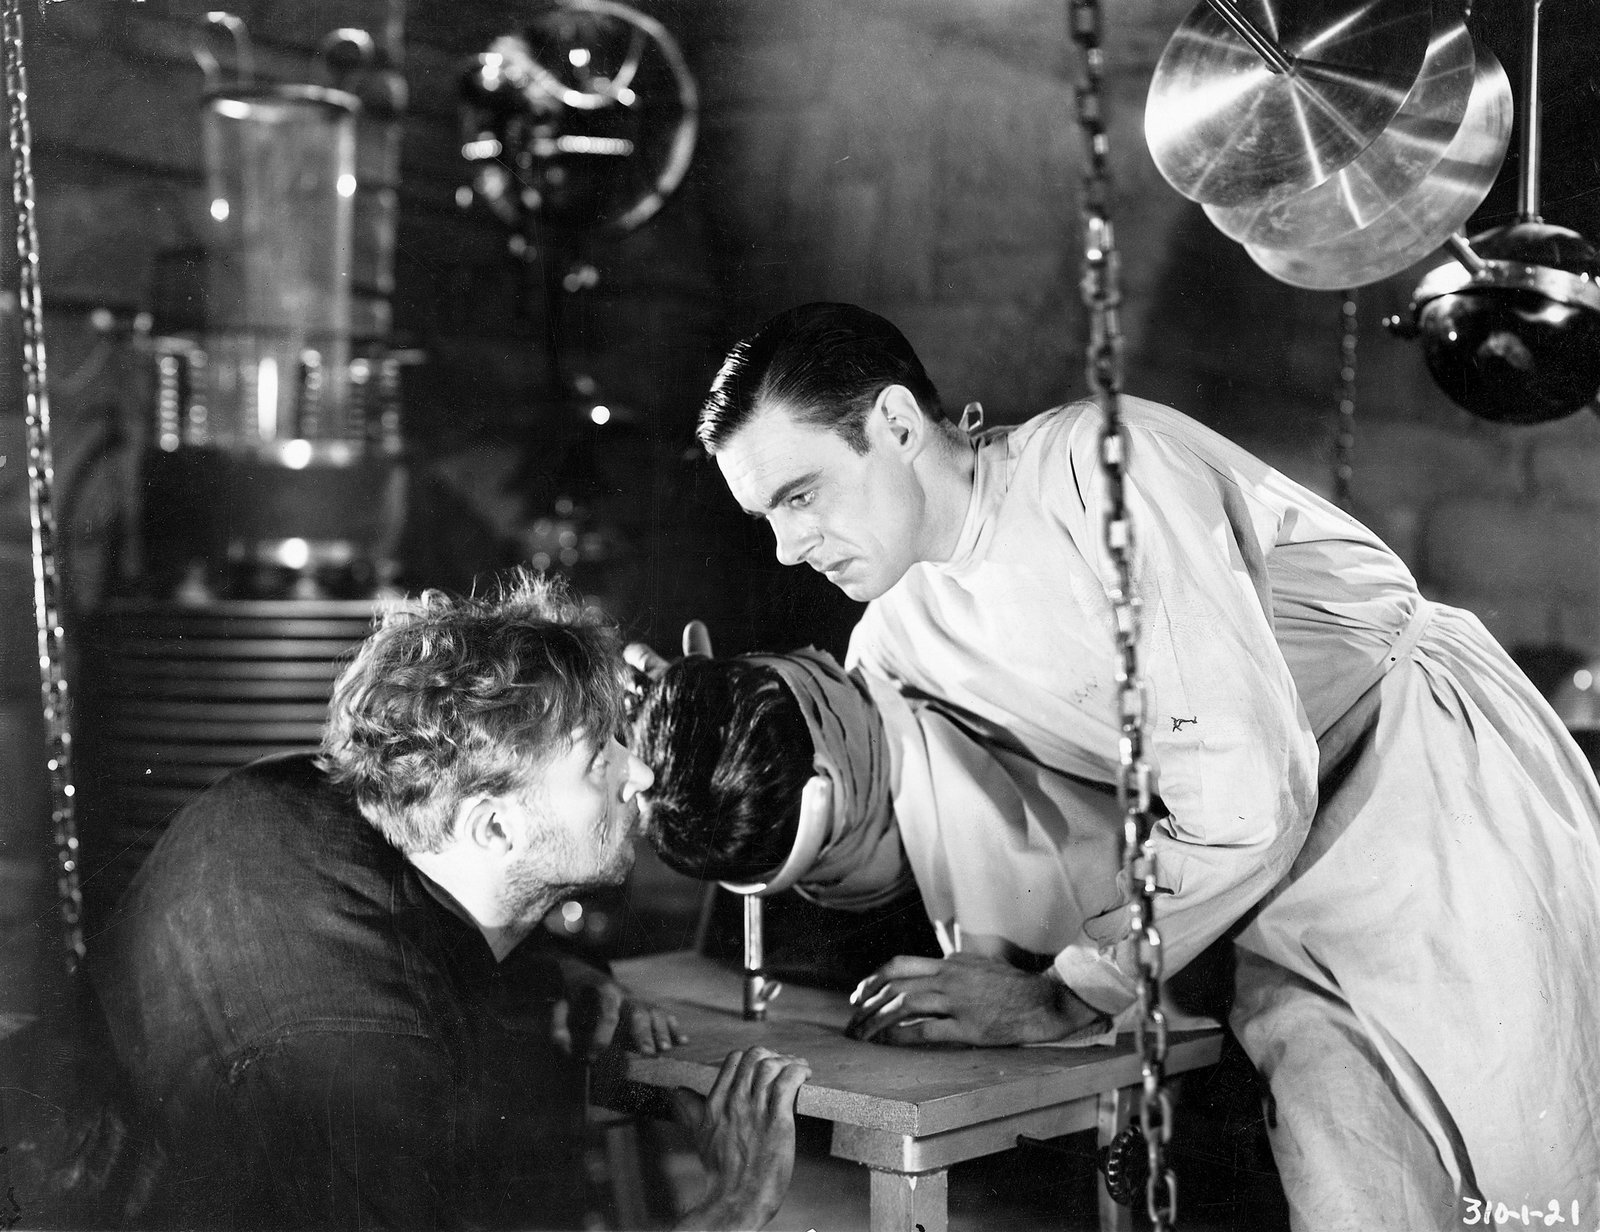 Frankenstein - The Man Who Made a Monster (blu-ray)